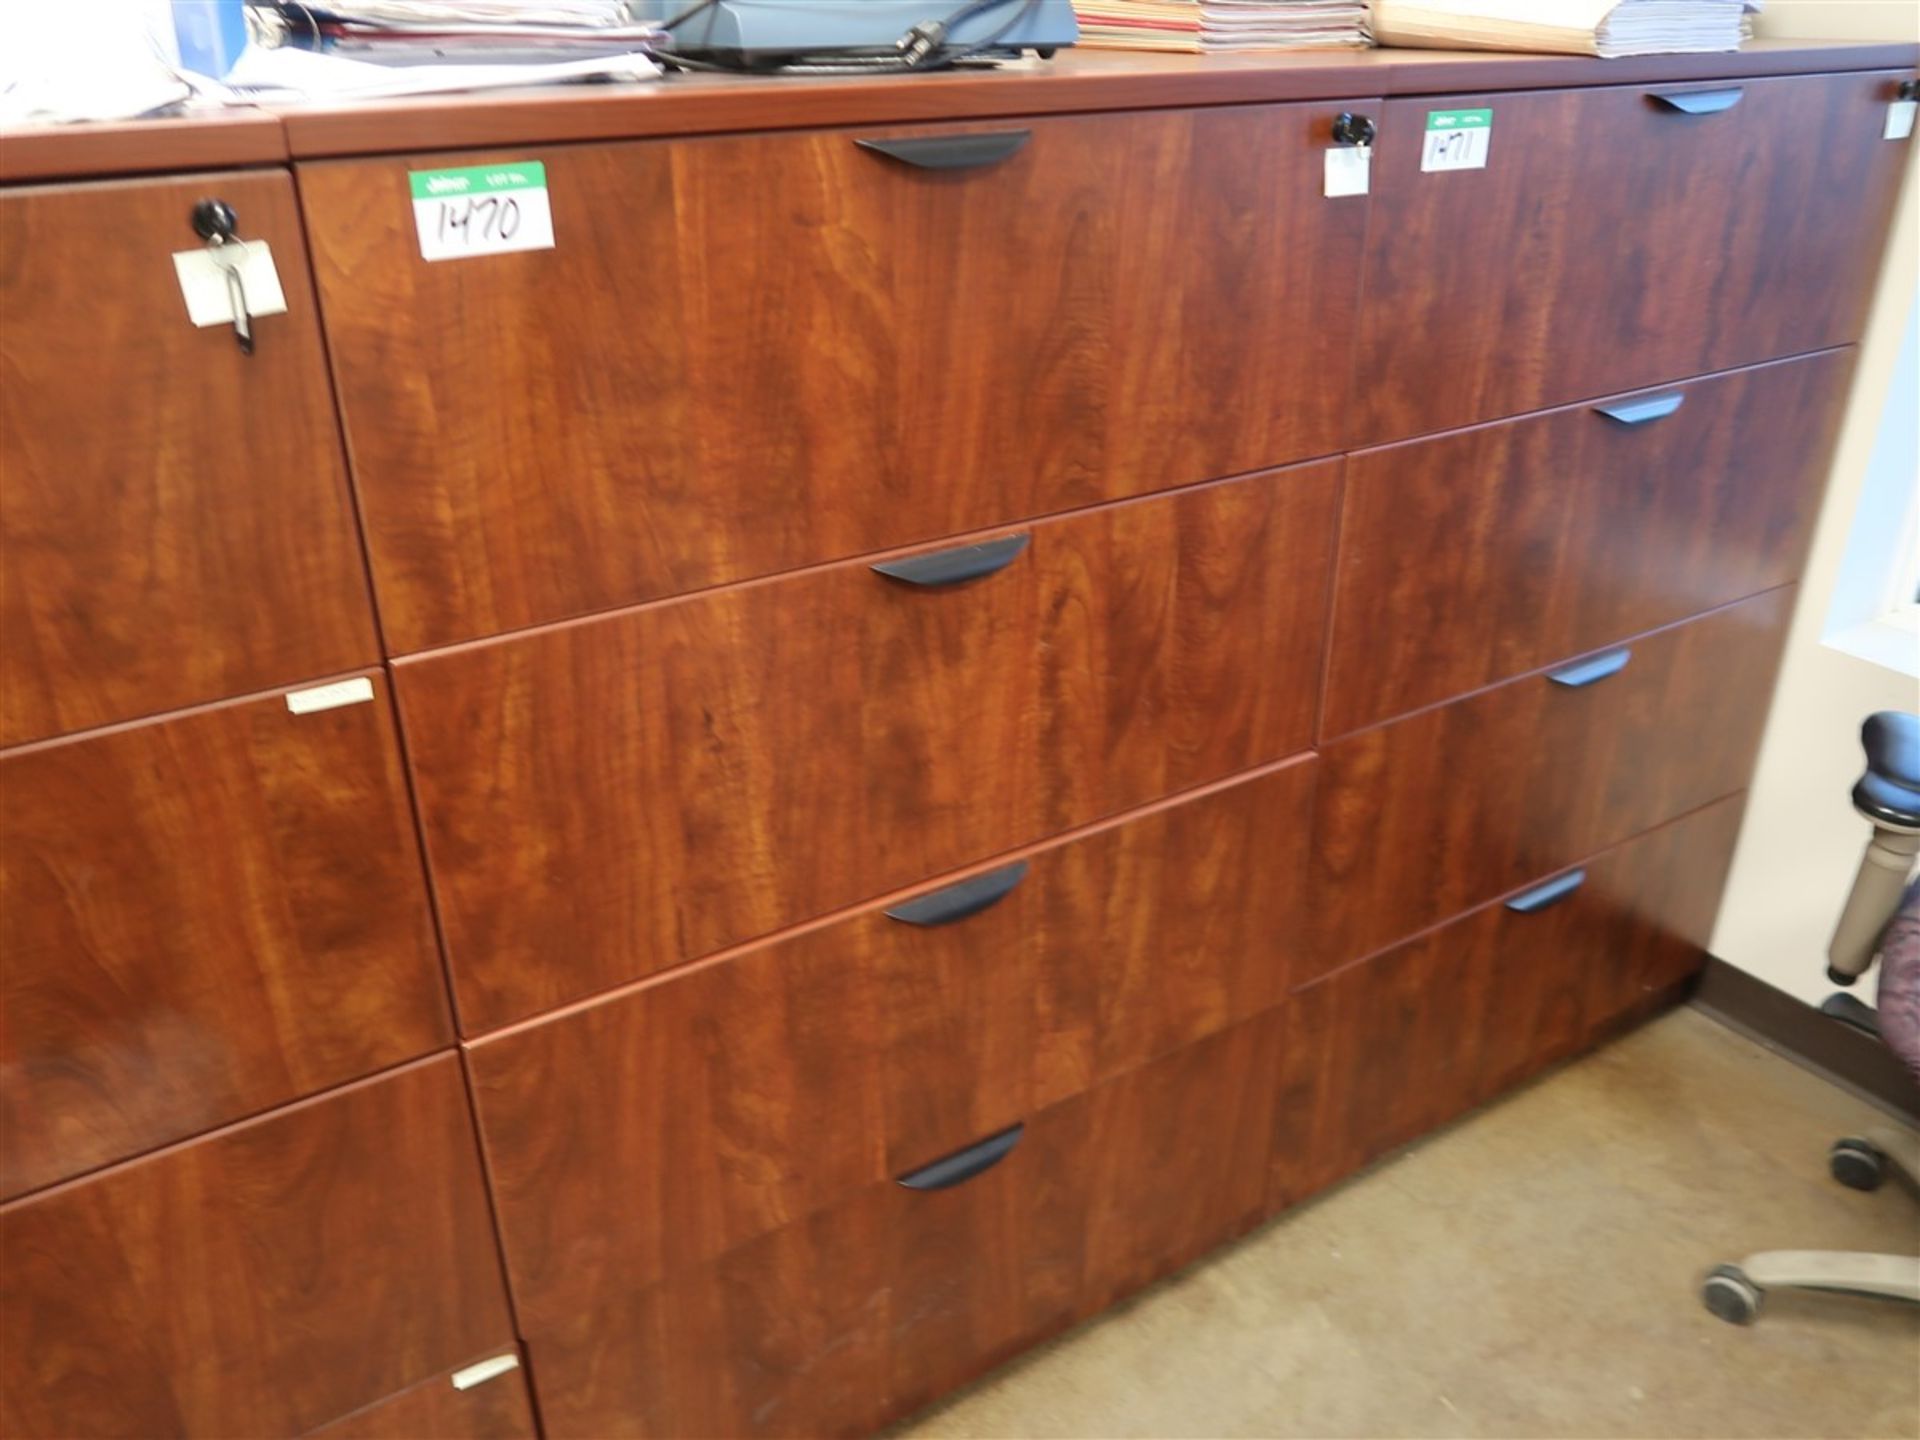 4 DRAWER WOODEN LATERAL FILING CABINET